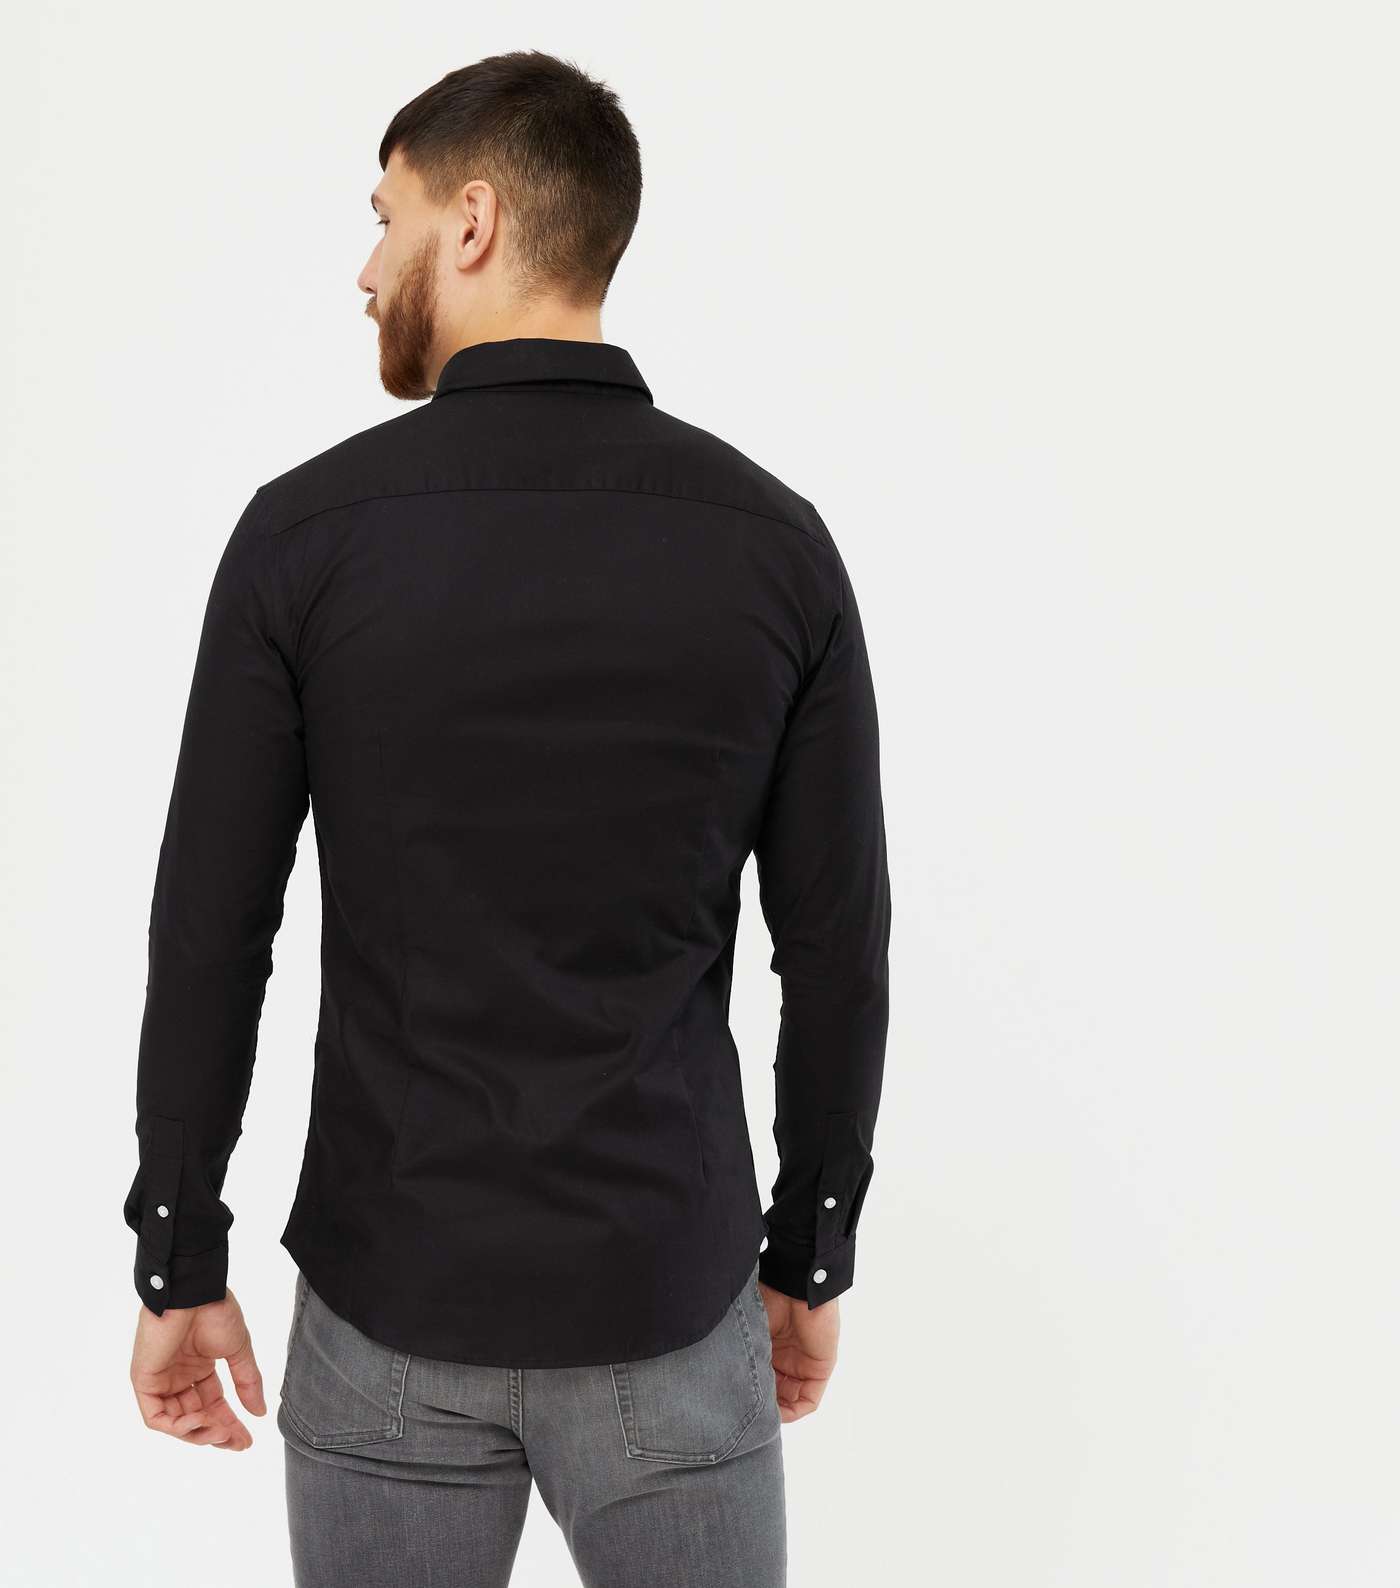 Black Long Sleeve Muscle Fit Oxford Shirt Image 4